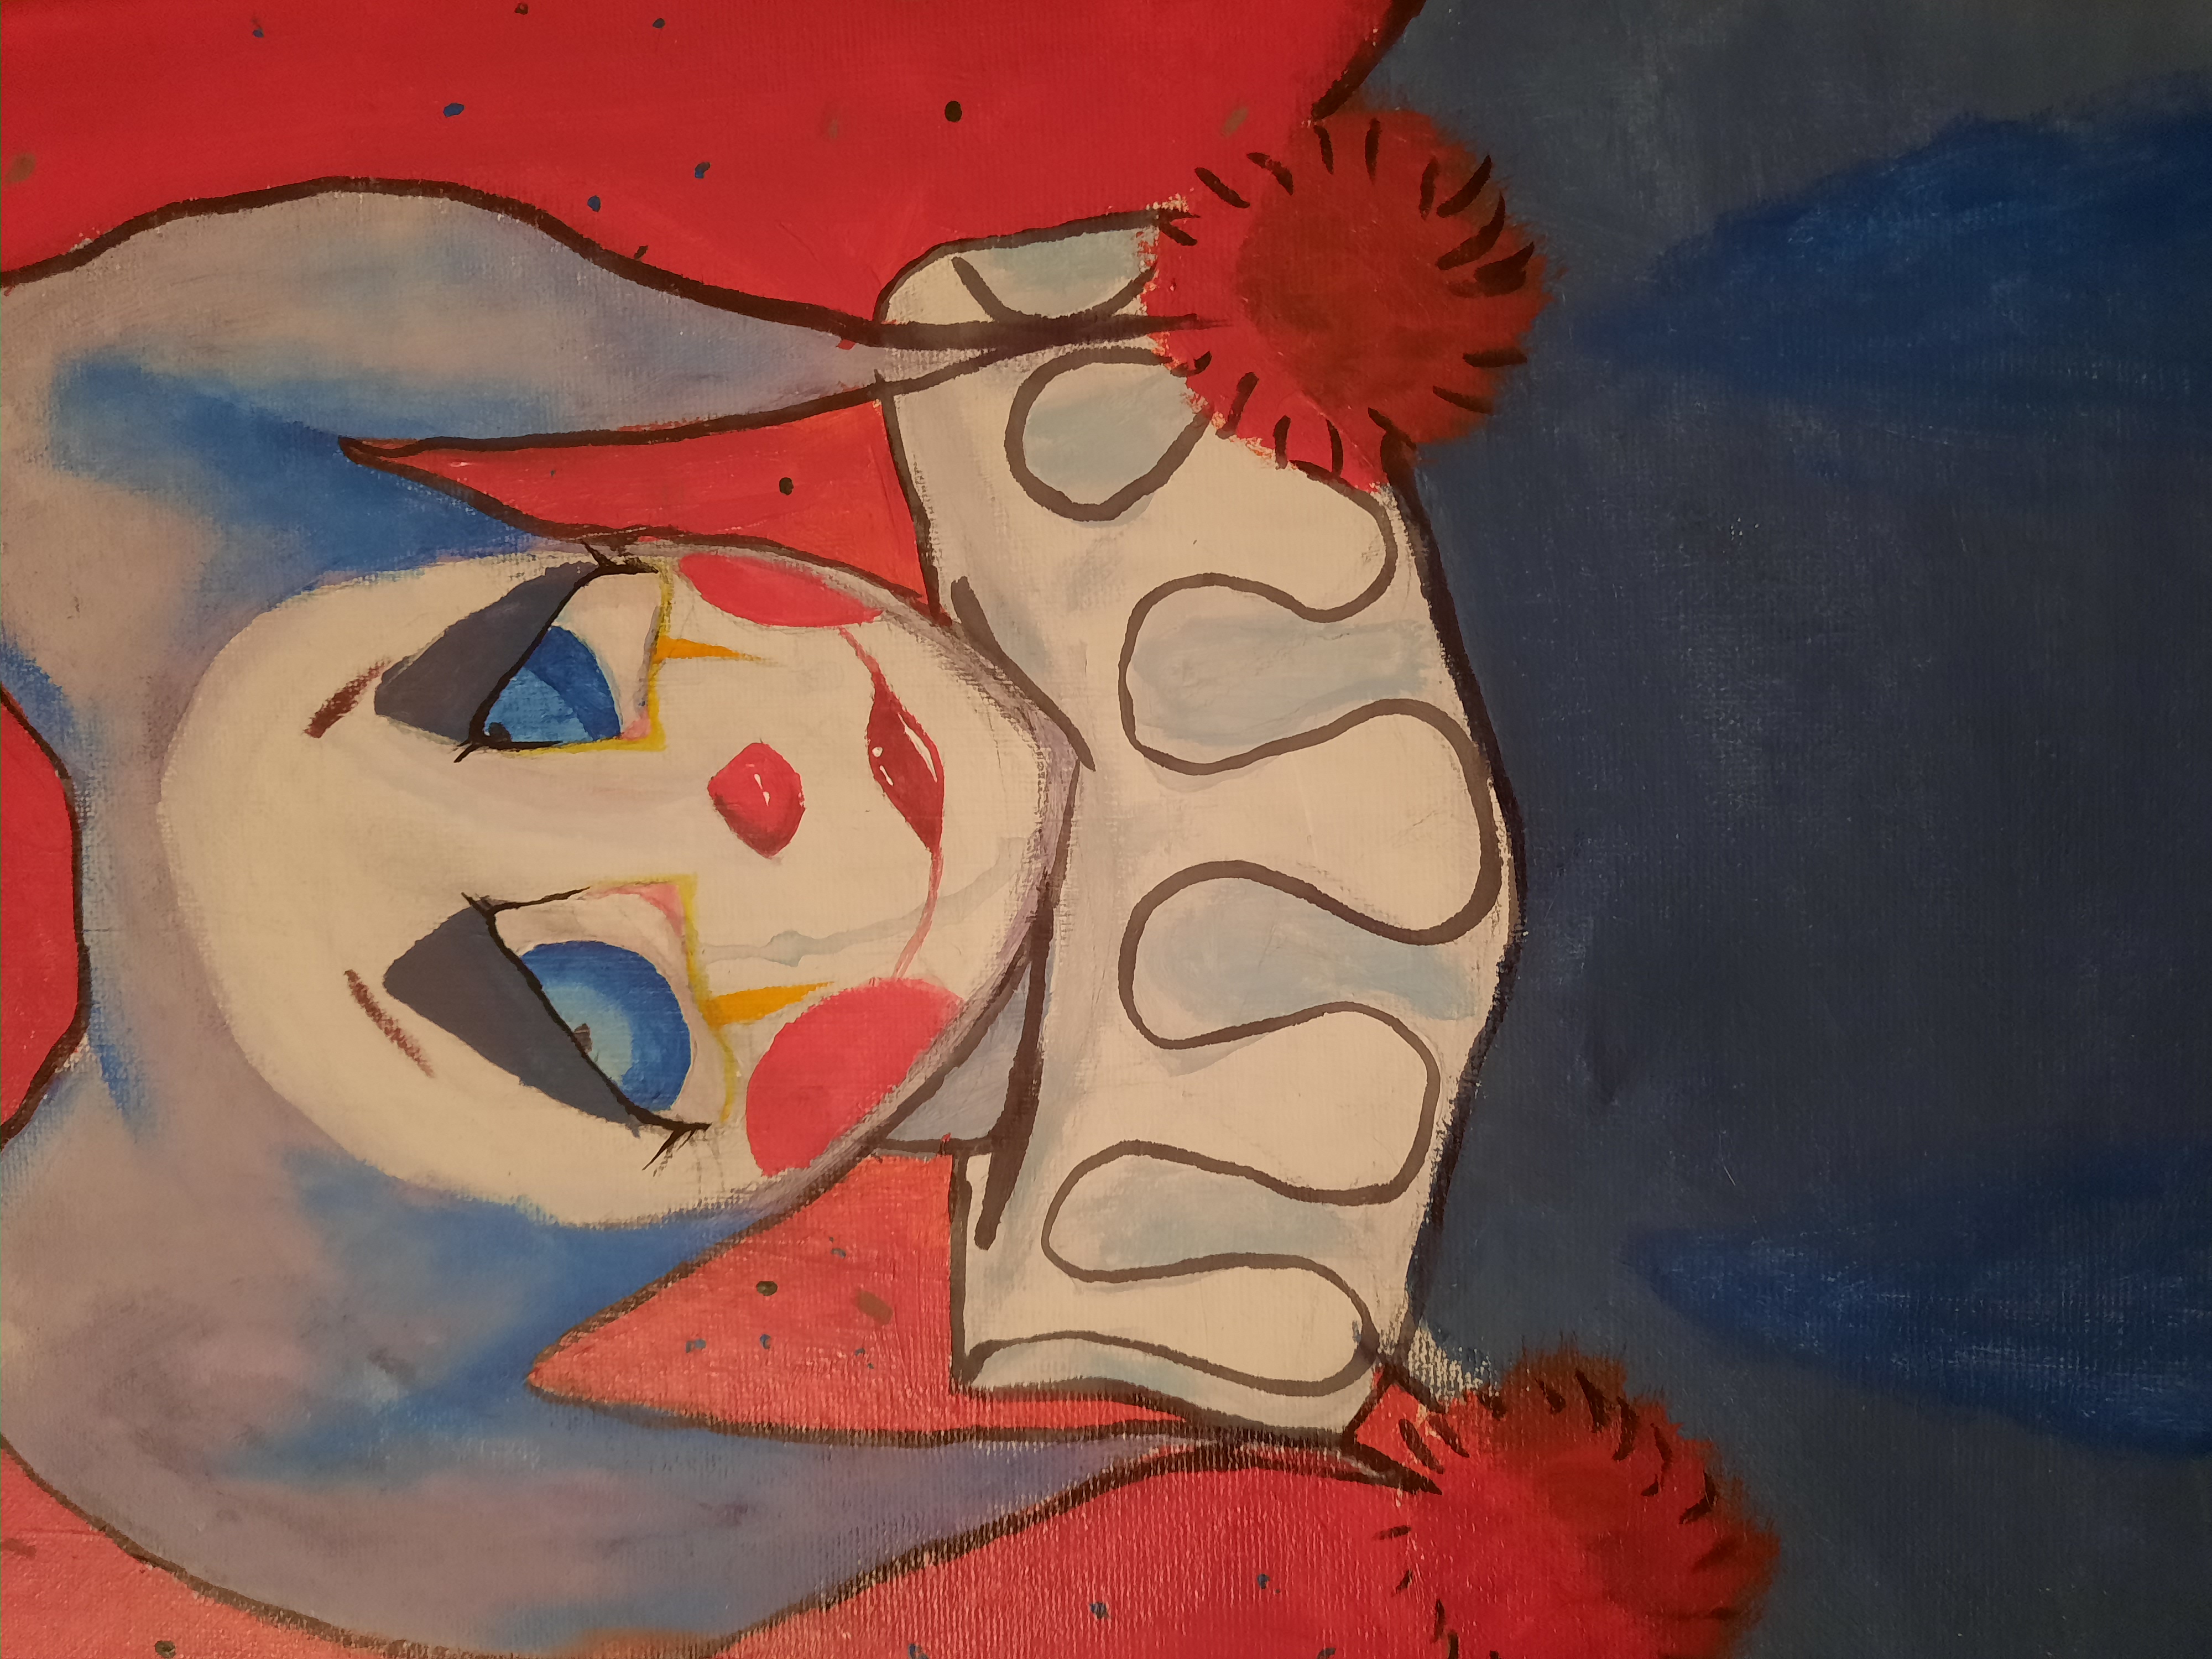 'Clown' by Sarah (15) from Meath